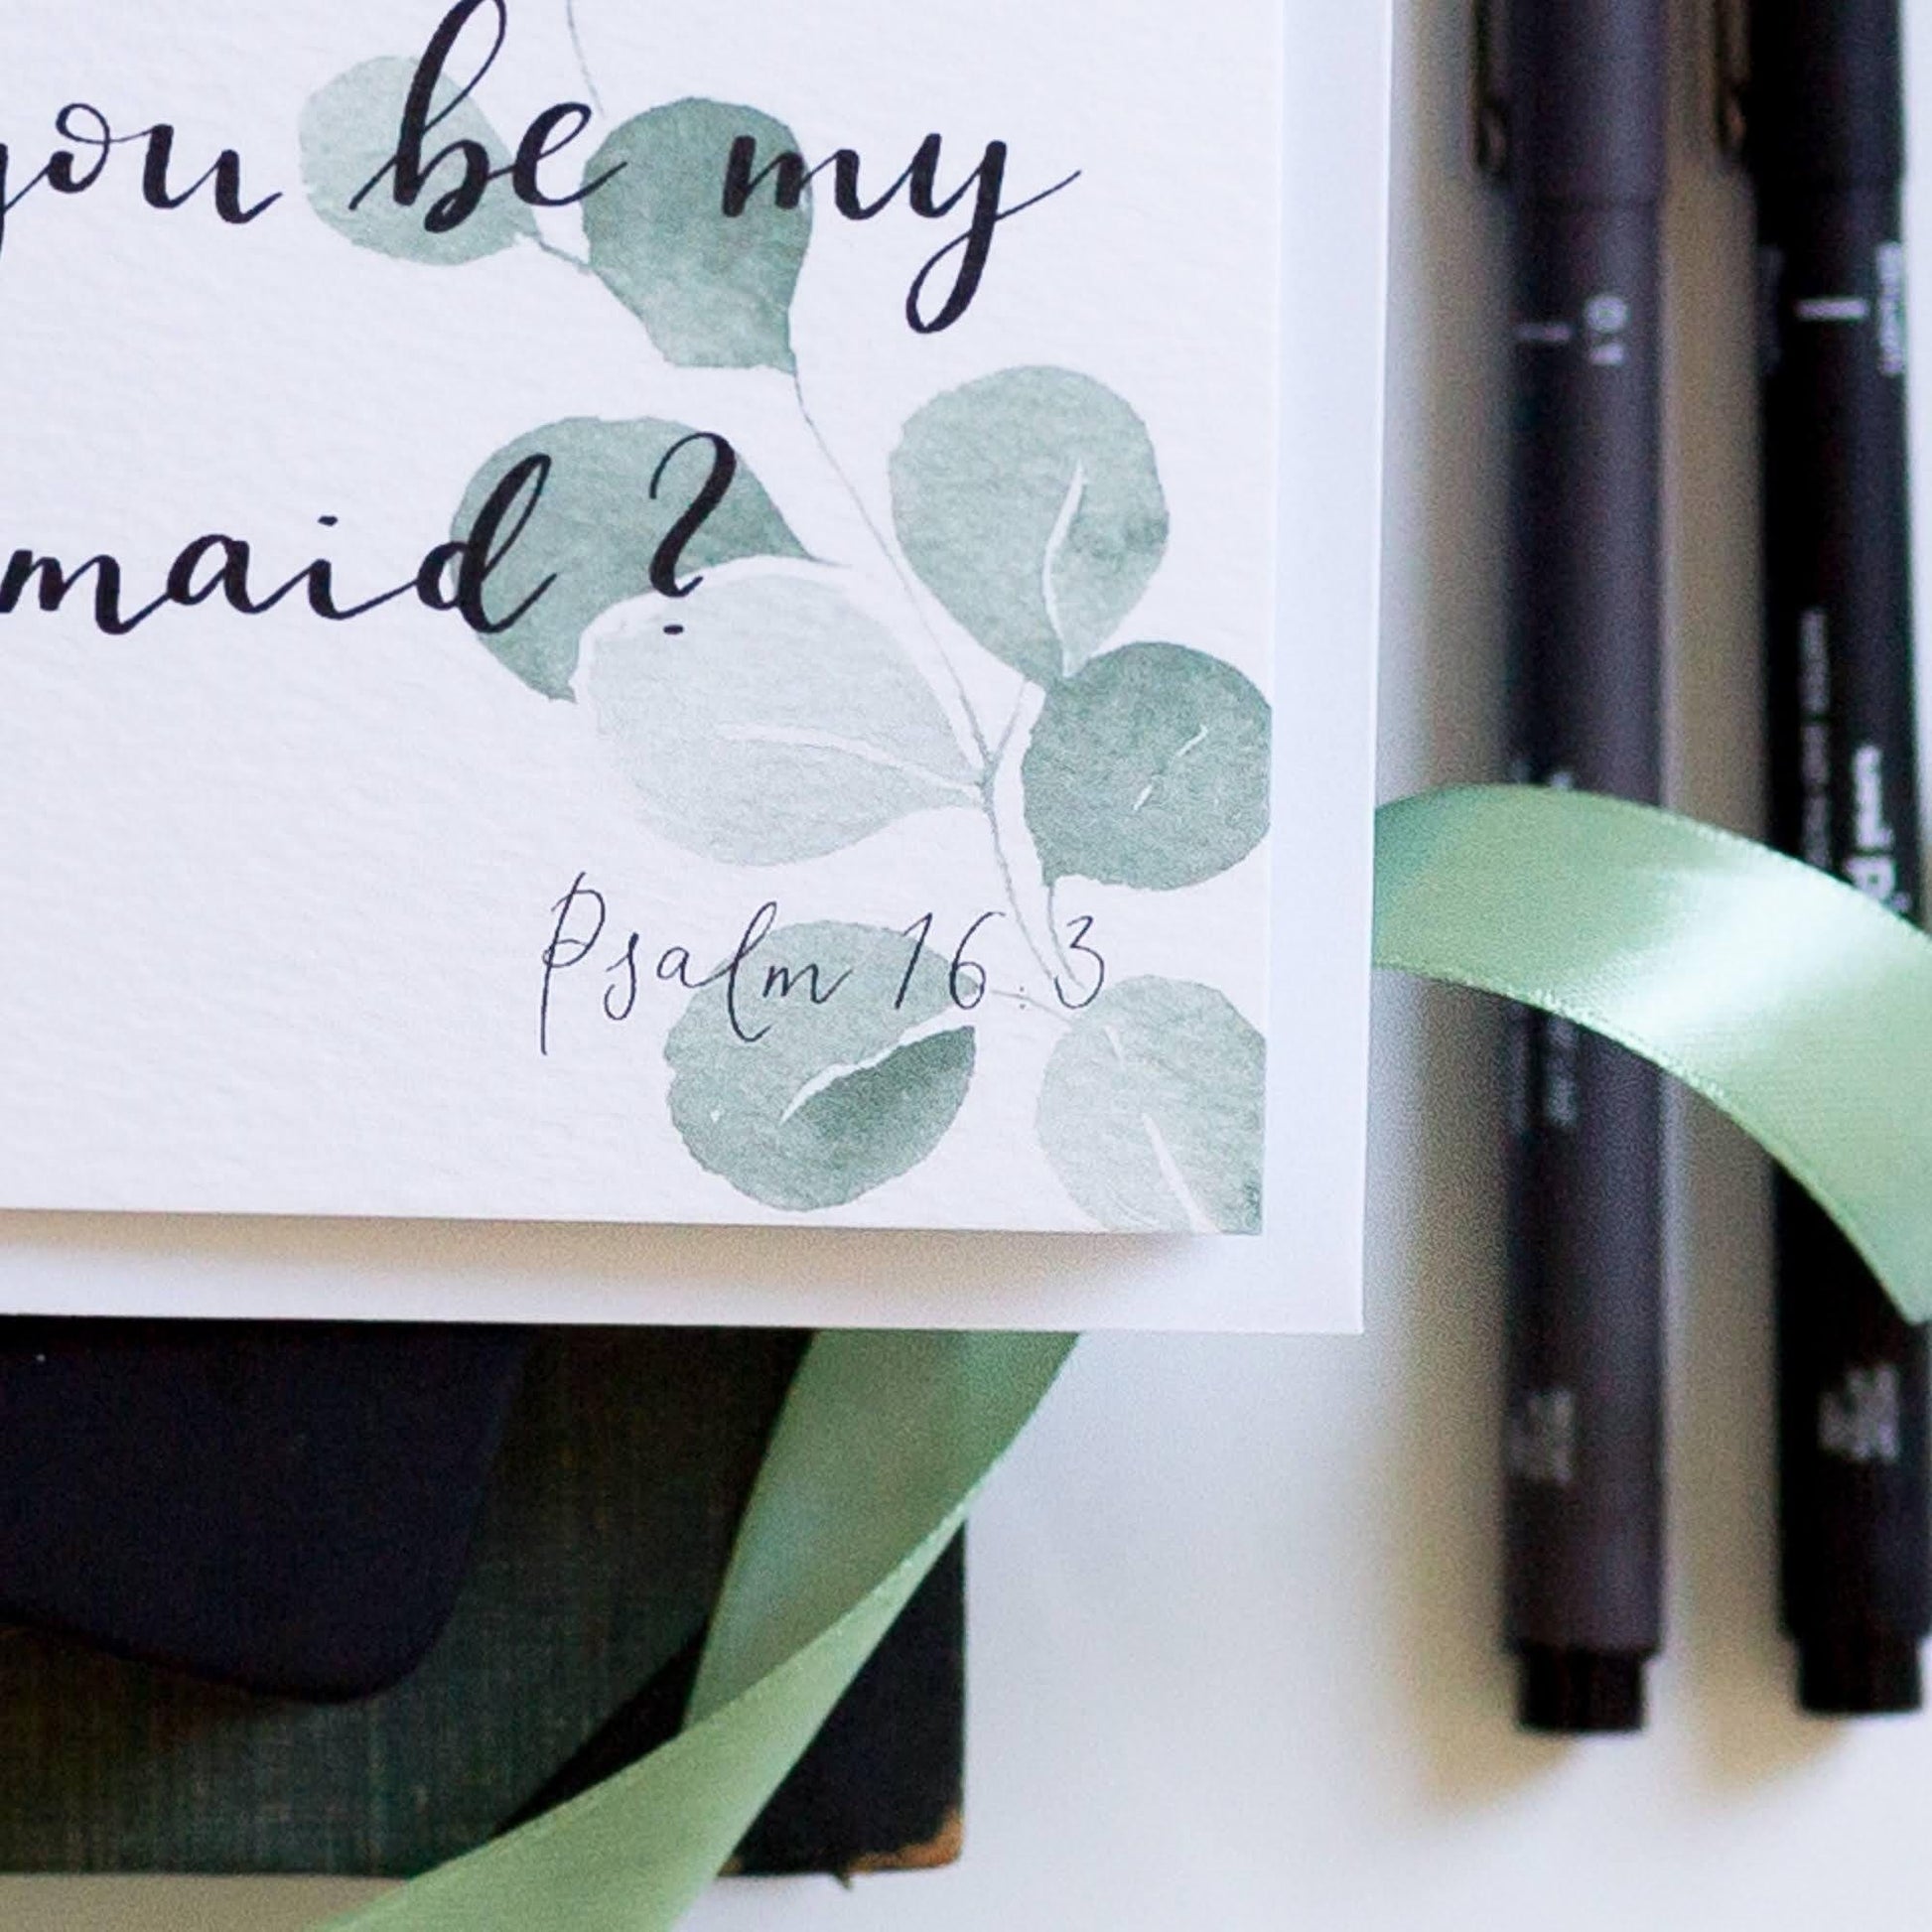 Close up of psalm 16:3 in the corner of the bridesmaid proposal card